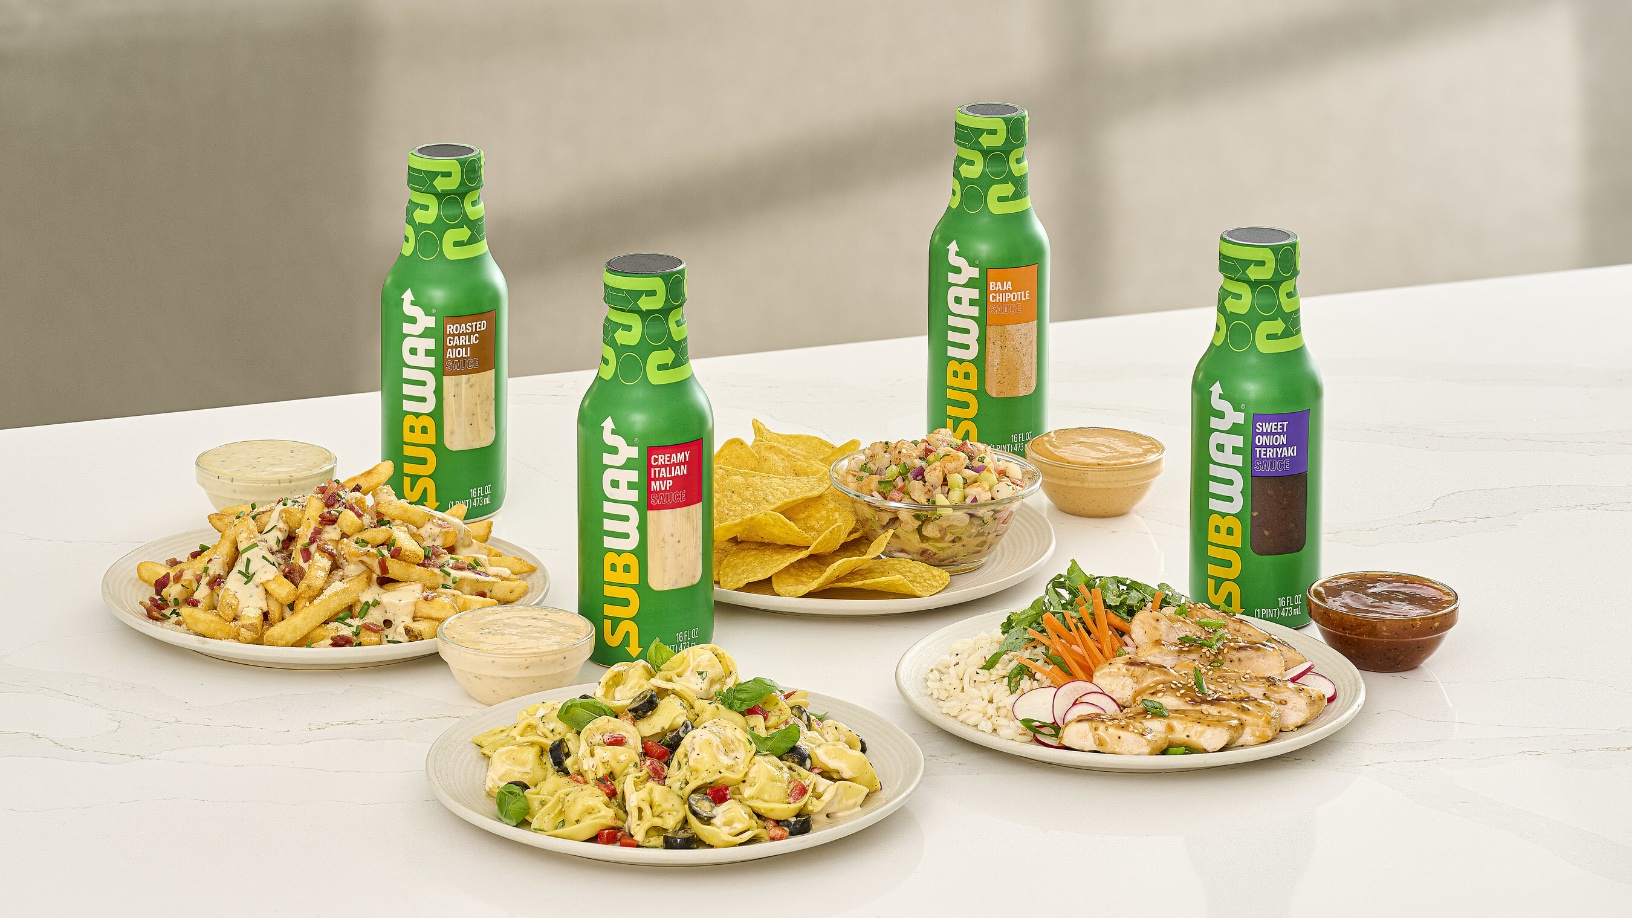 Make Your Own Sandwich Art At Home With Subway’s New Line Of Bottled Sauces (or Don’t)